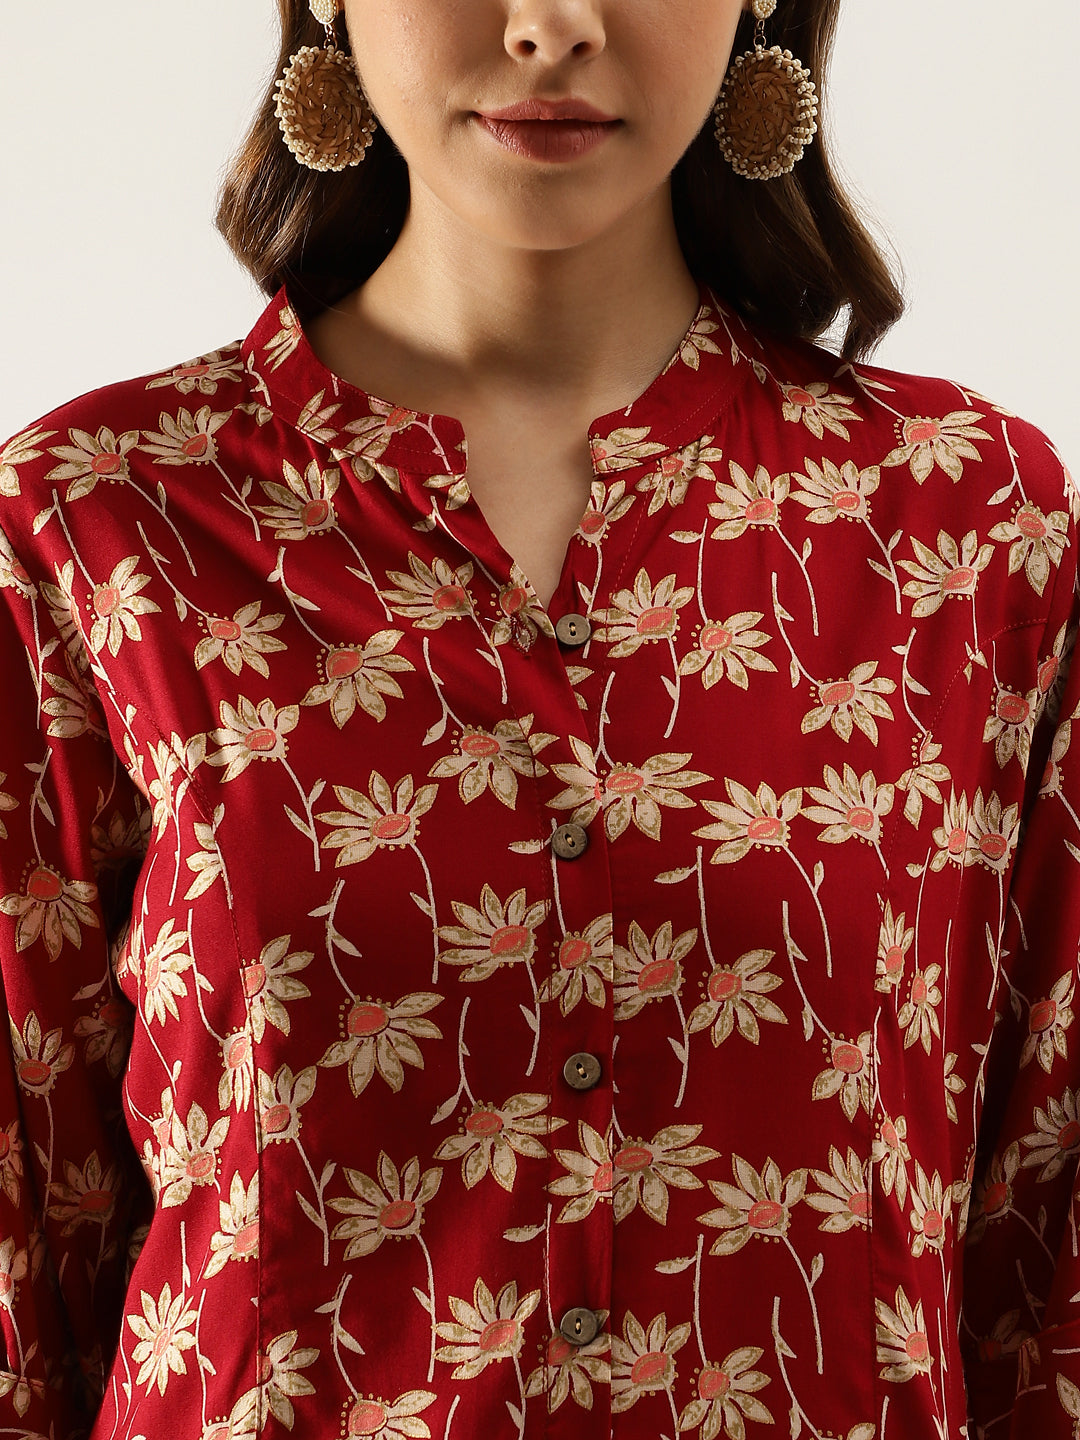 Divena Maroon Floral Printed Rayon Shirt type Top for Women